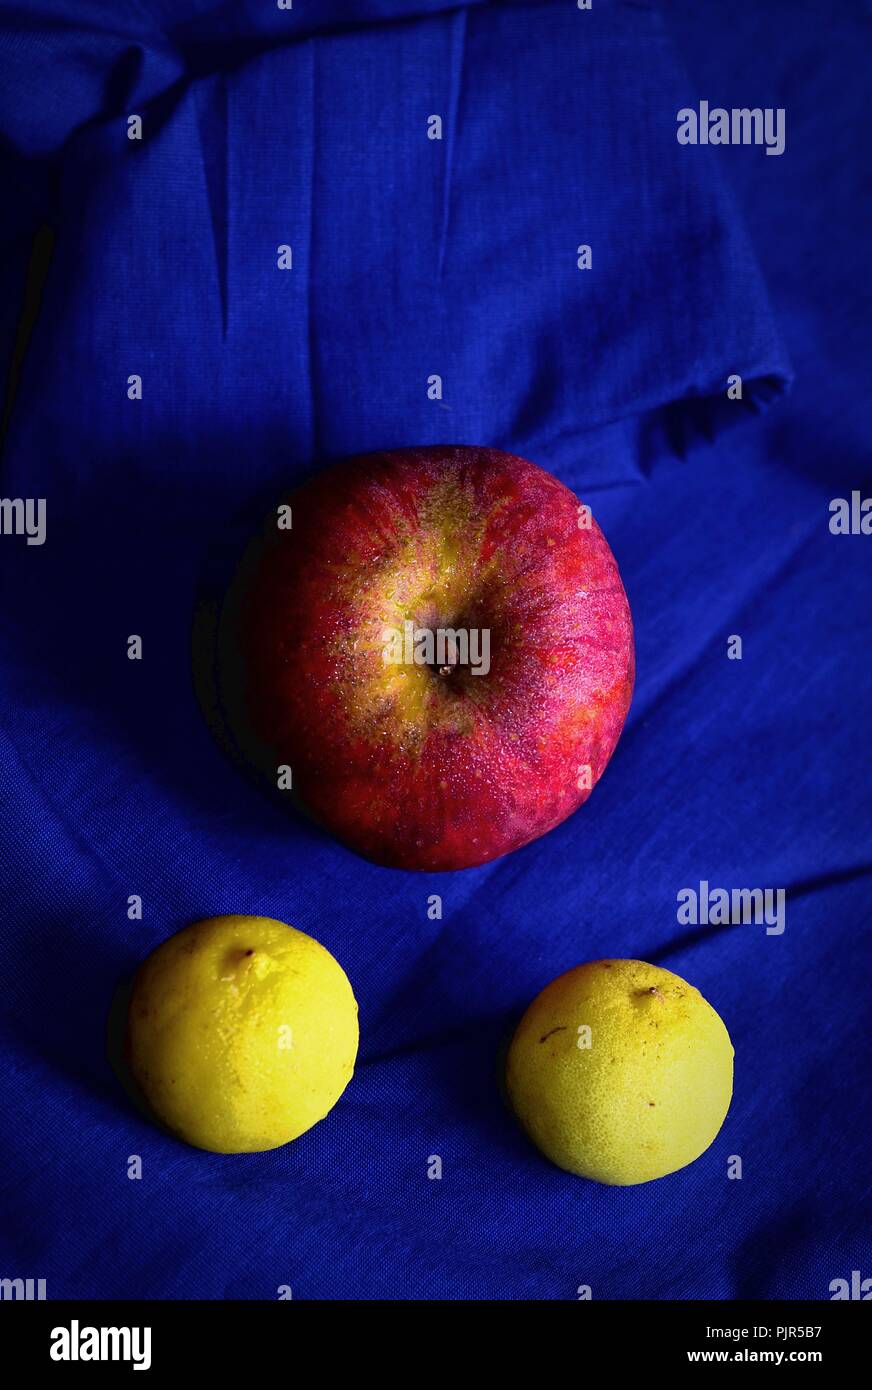 Red sweating apple with two ripe lemons, kept on a blue shirt Stock Photo